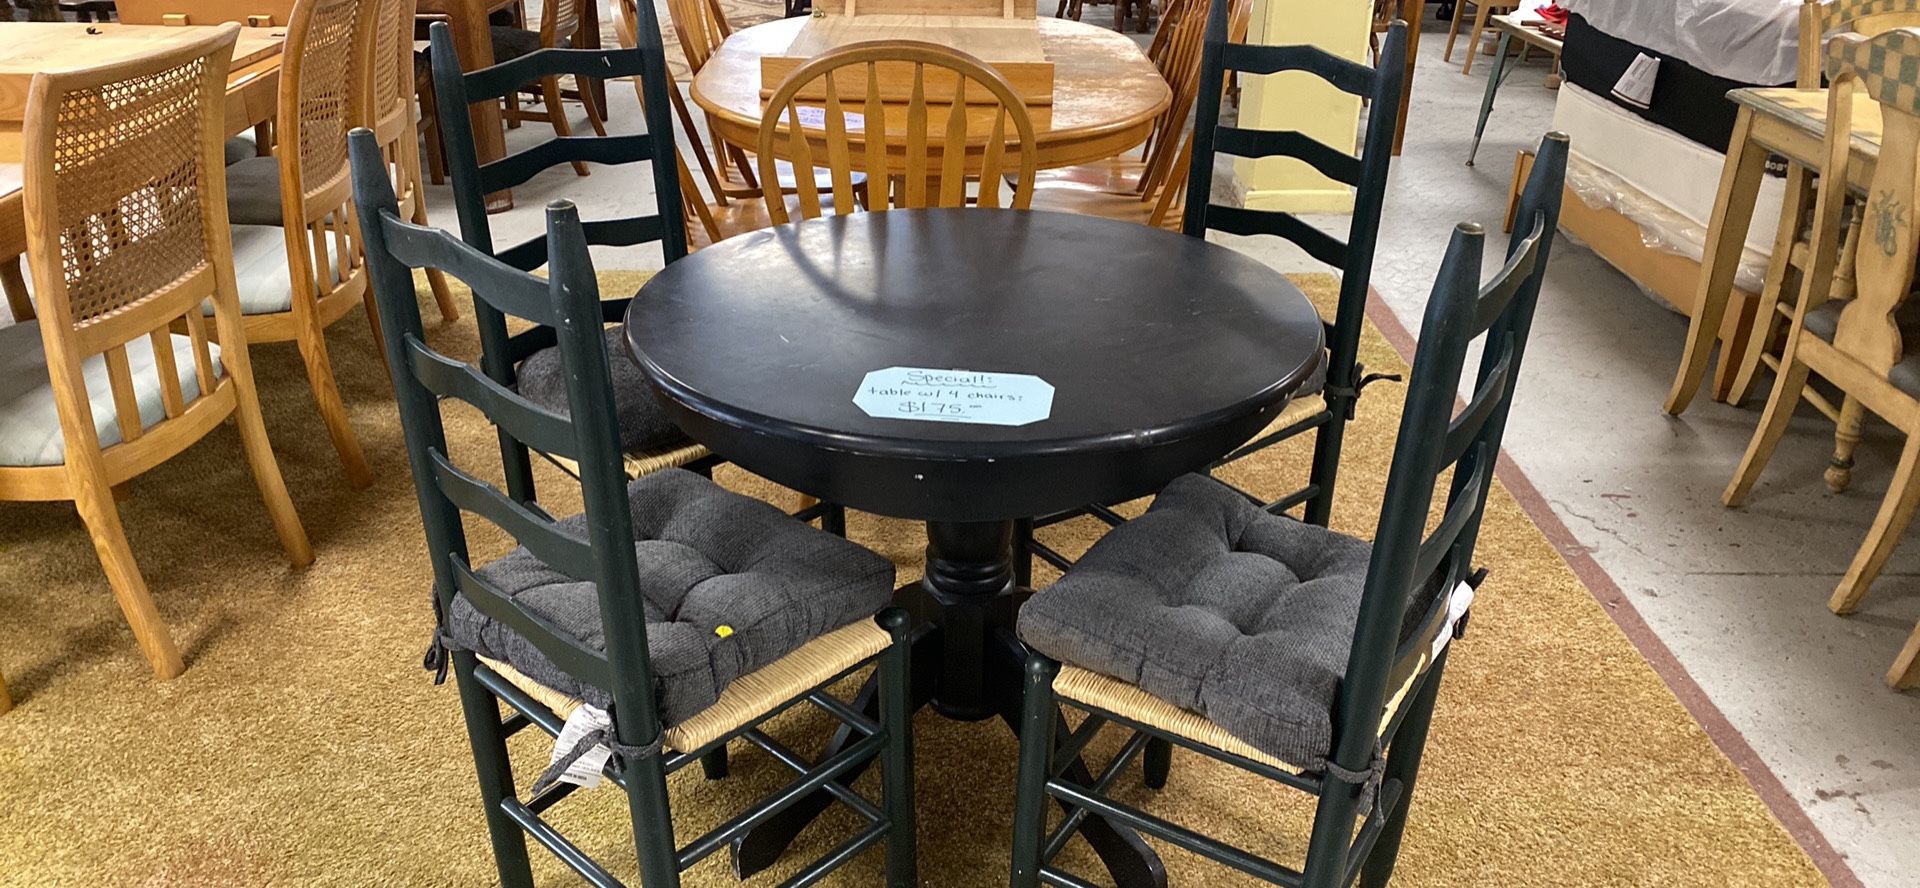 Round Table W/ 4 Chairs $175